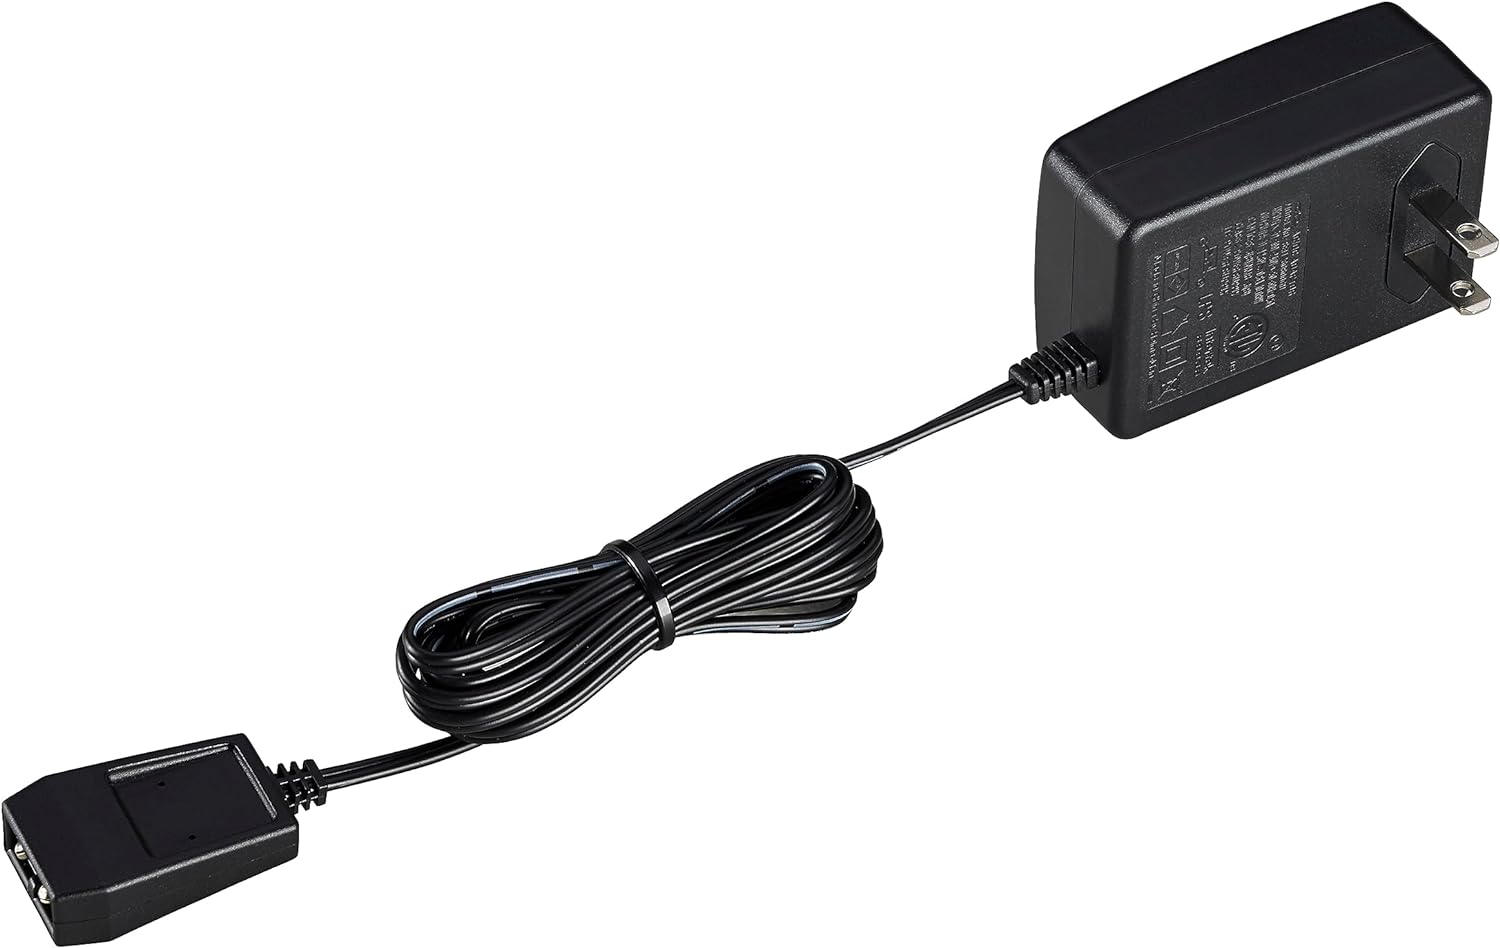 100V/120V AC Wall Adapter for Streamlight® Rechargeable Lights (22060)